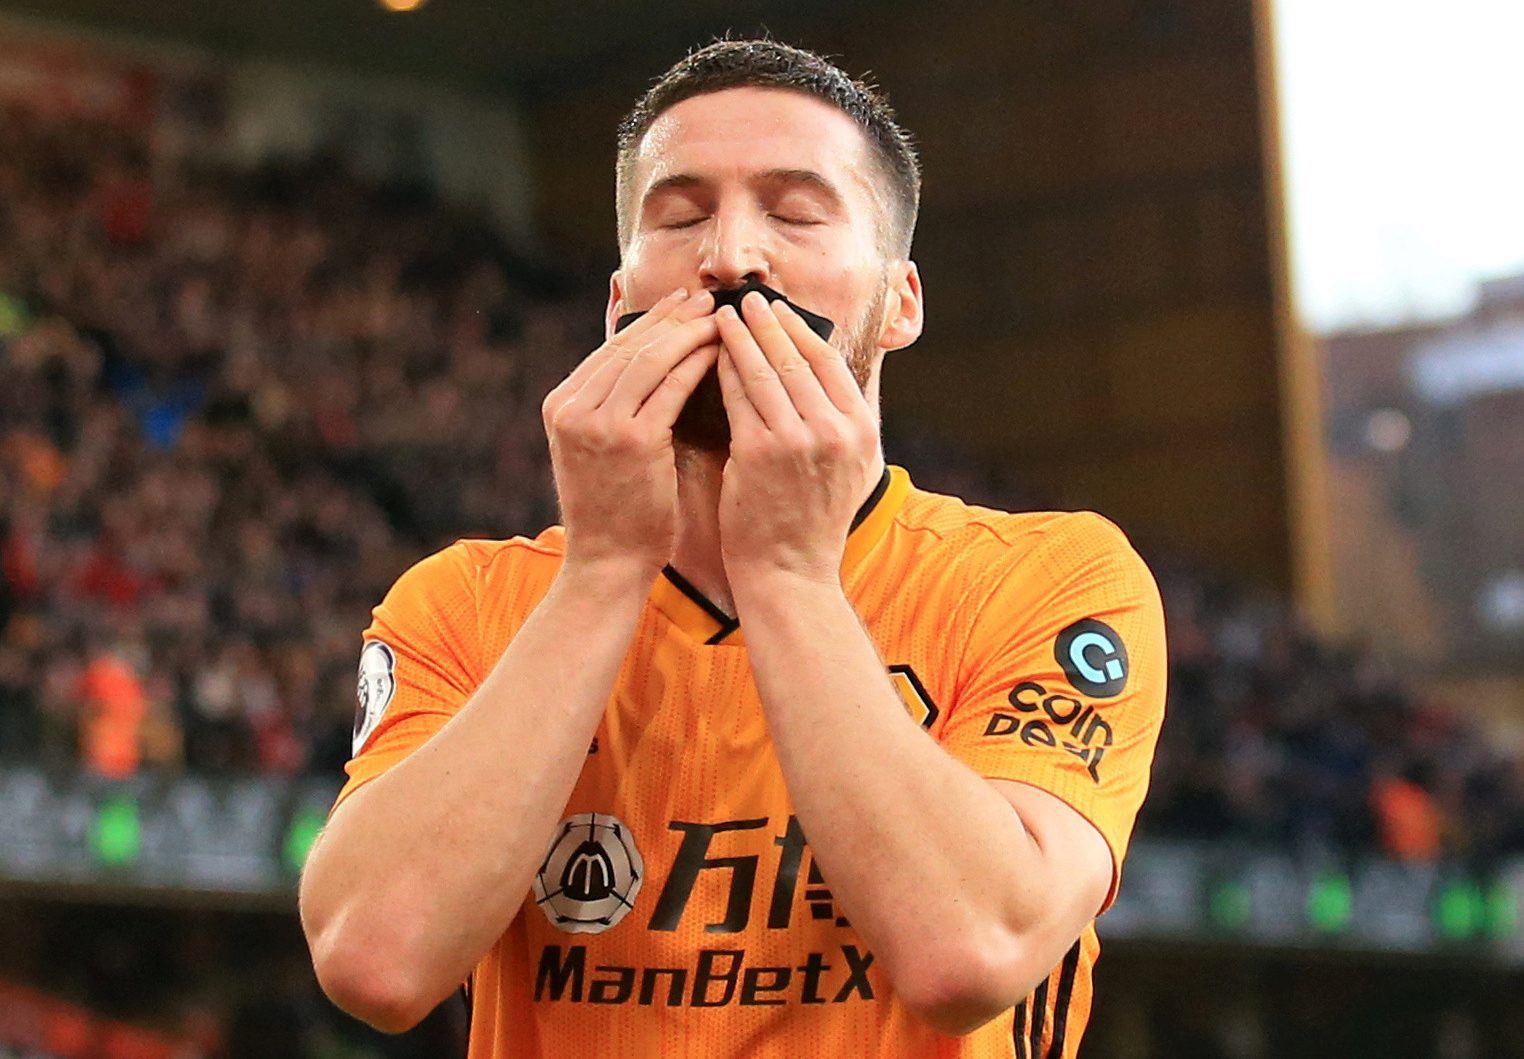 Wolves players all wore a black armband, with Matt Doherty marking his equaliser against Sheffield United with this tribute